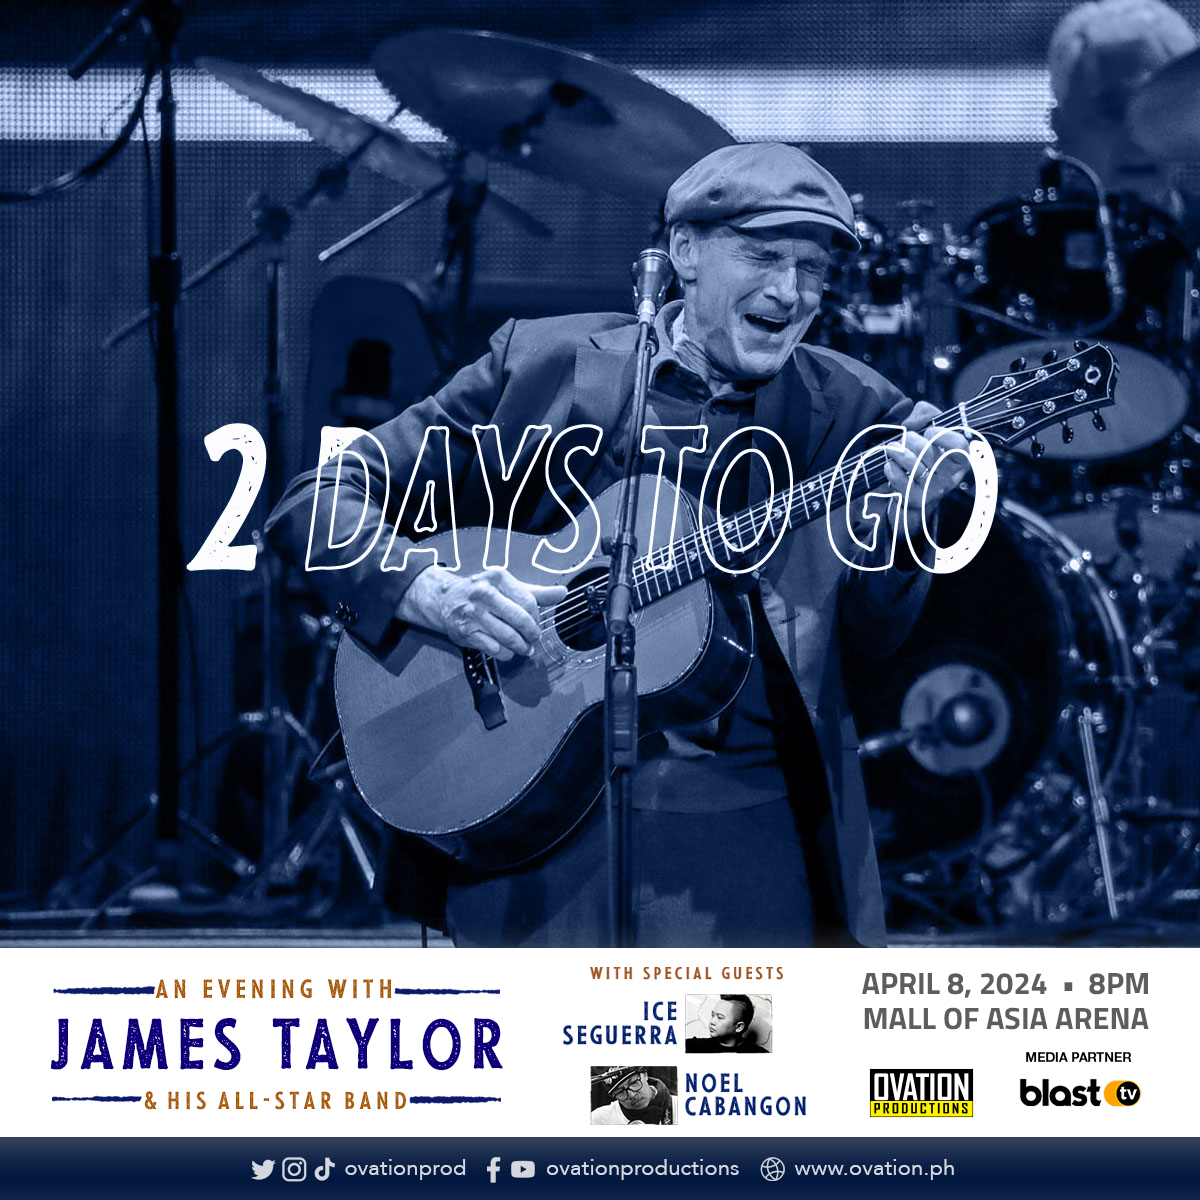 We still have 2 days to go before James Taylor's concert at the Mall of Asia Arena on April 8, 2024! Don't miss out! Get your tickets at smtickets.com